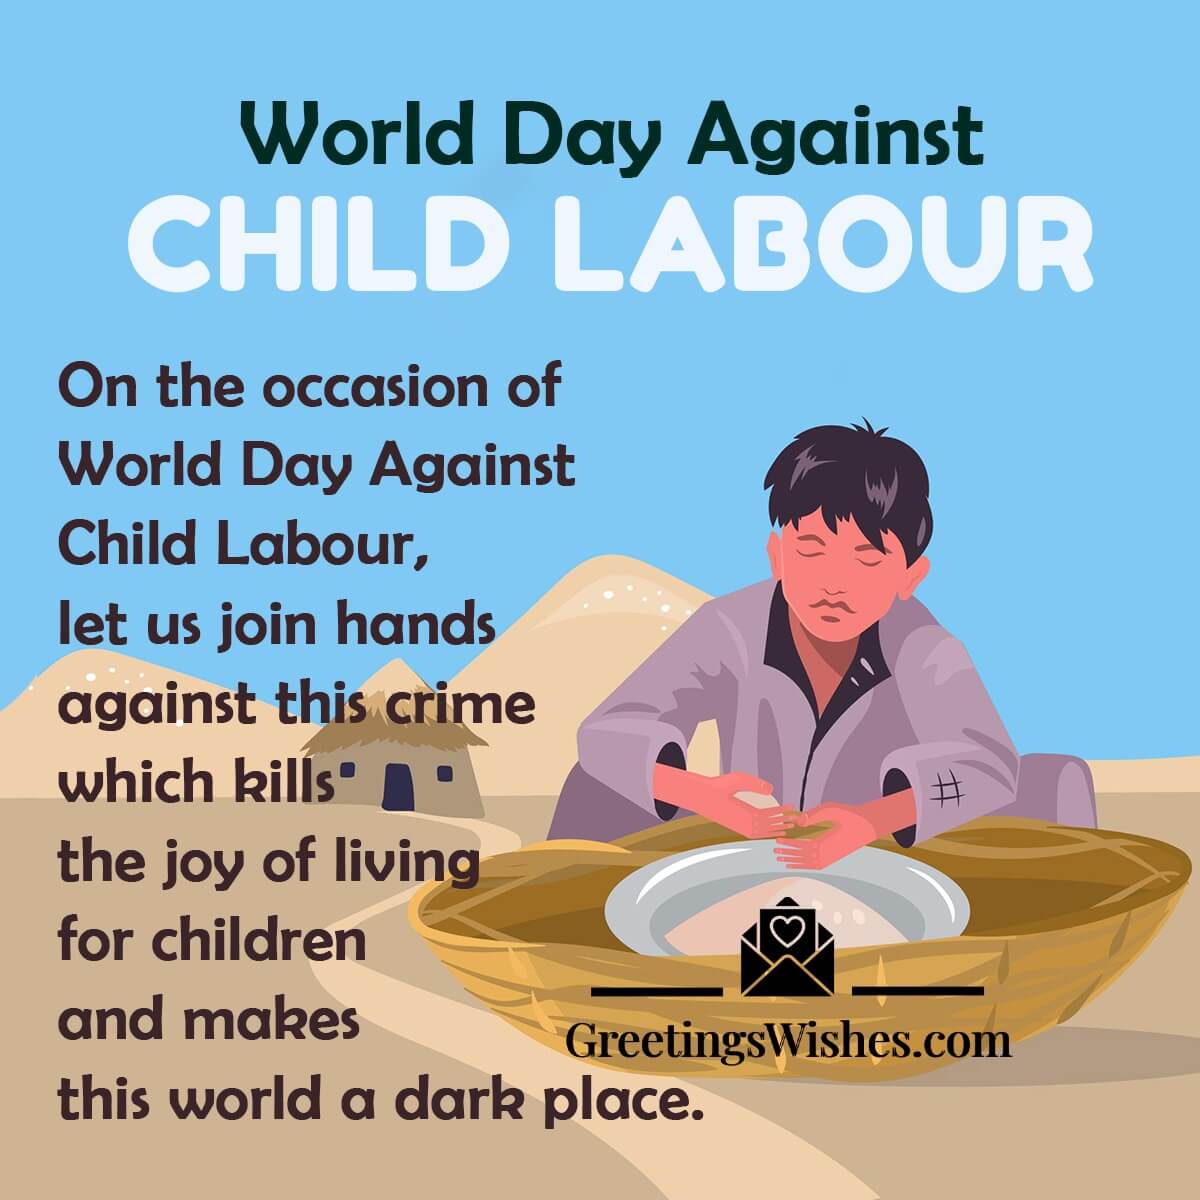 World Day Against Child Labour Message